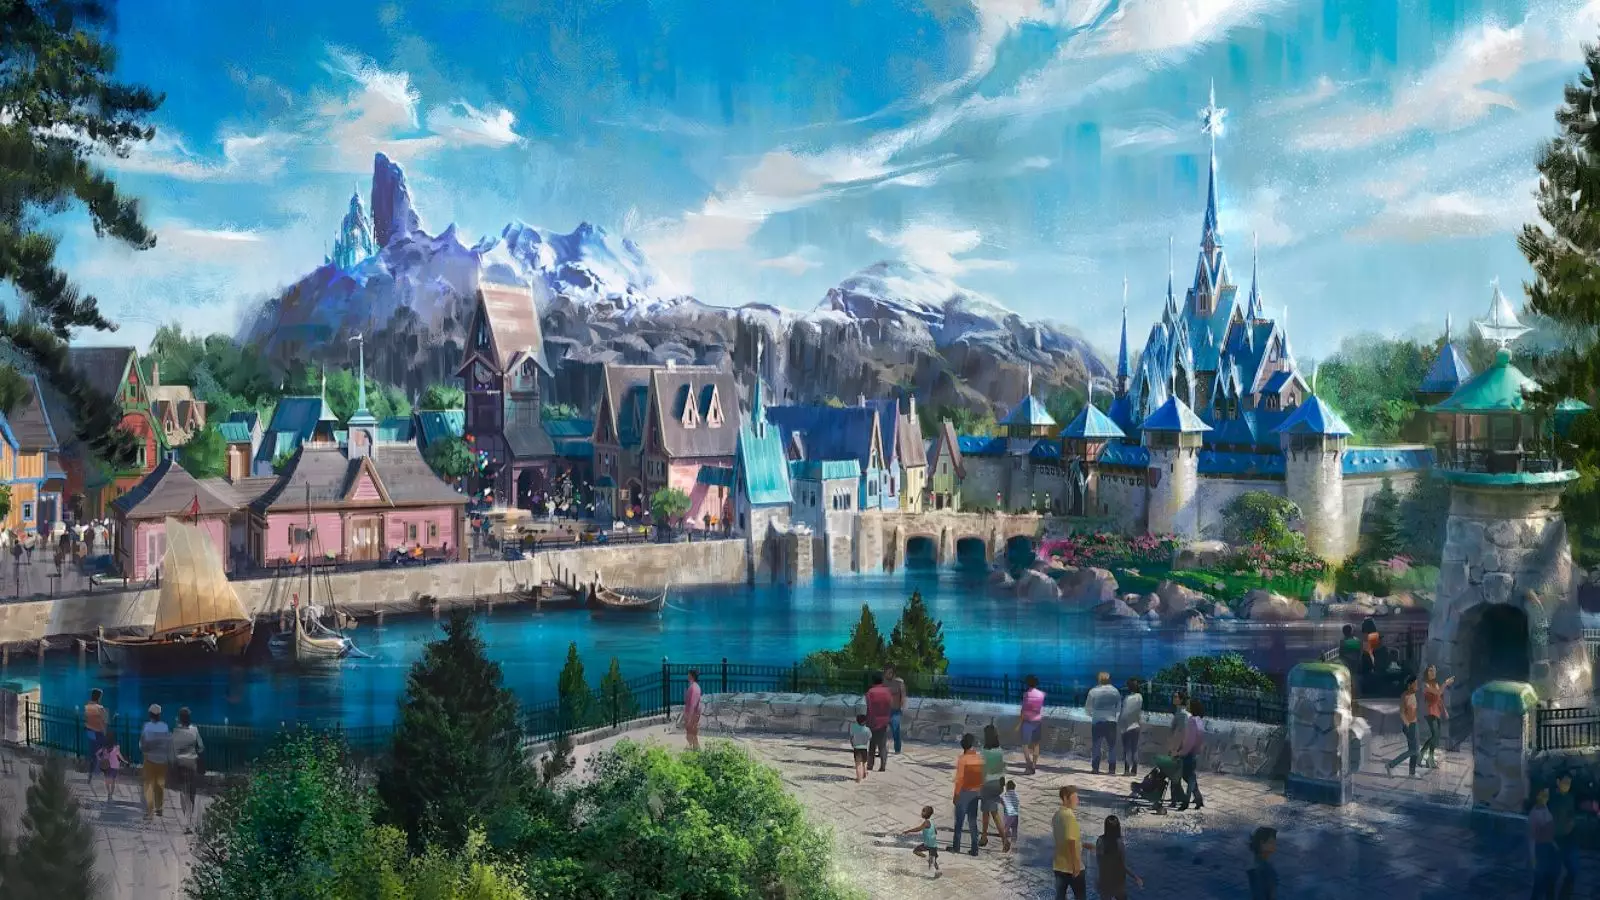 New Details On 'Frozen' Land Coming To Disneyland Revealed